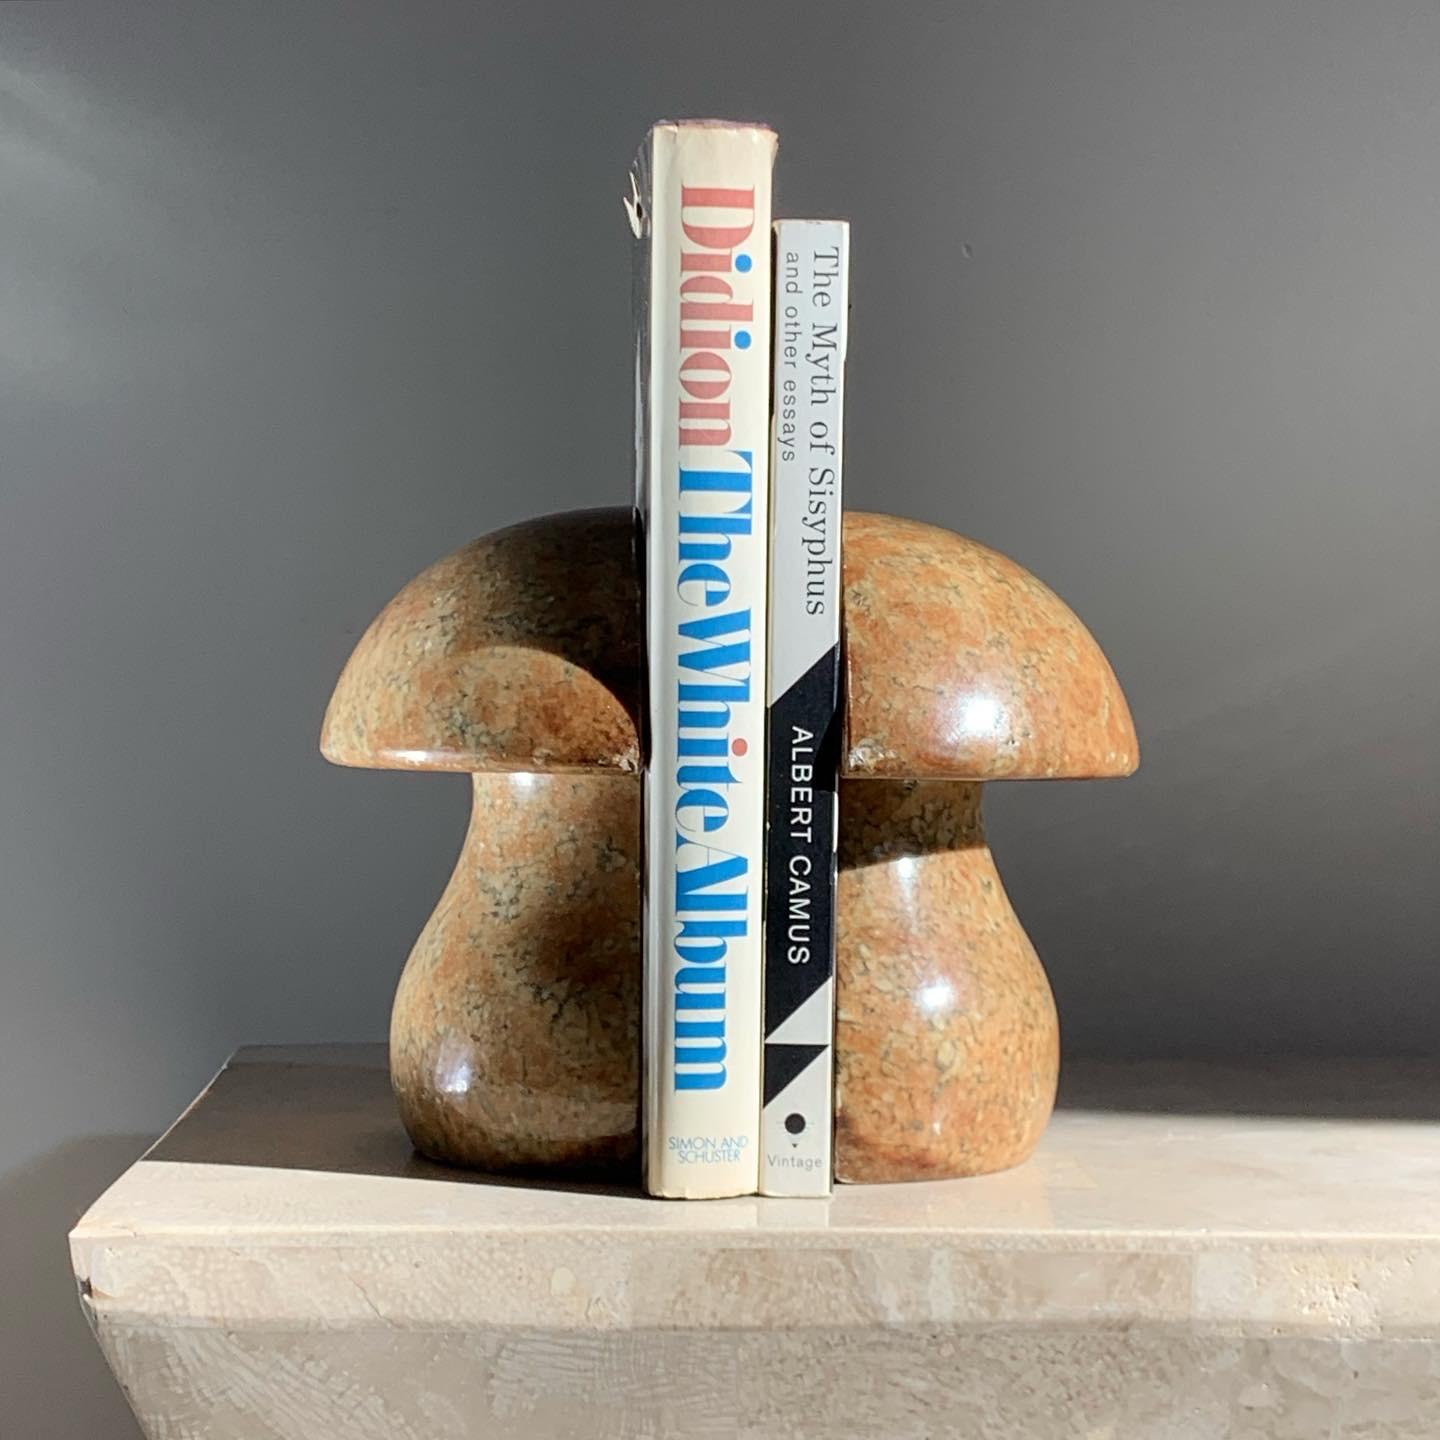 Pair of marble alabaster bookends in the shape of mushroom. Tones of ochre with charcoal and caramel veining. Minor signs of wear; please see pics for the tidbits of wear. Each measures 5.75” W x 2.25” D x 5.75” H.